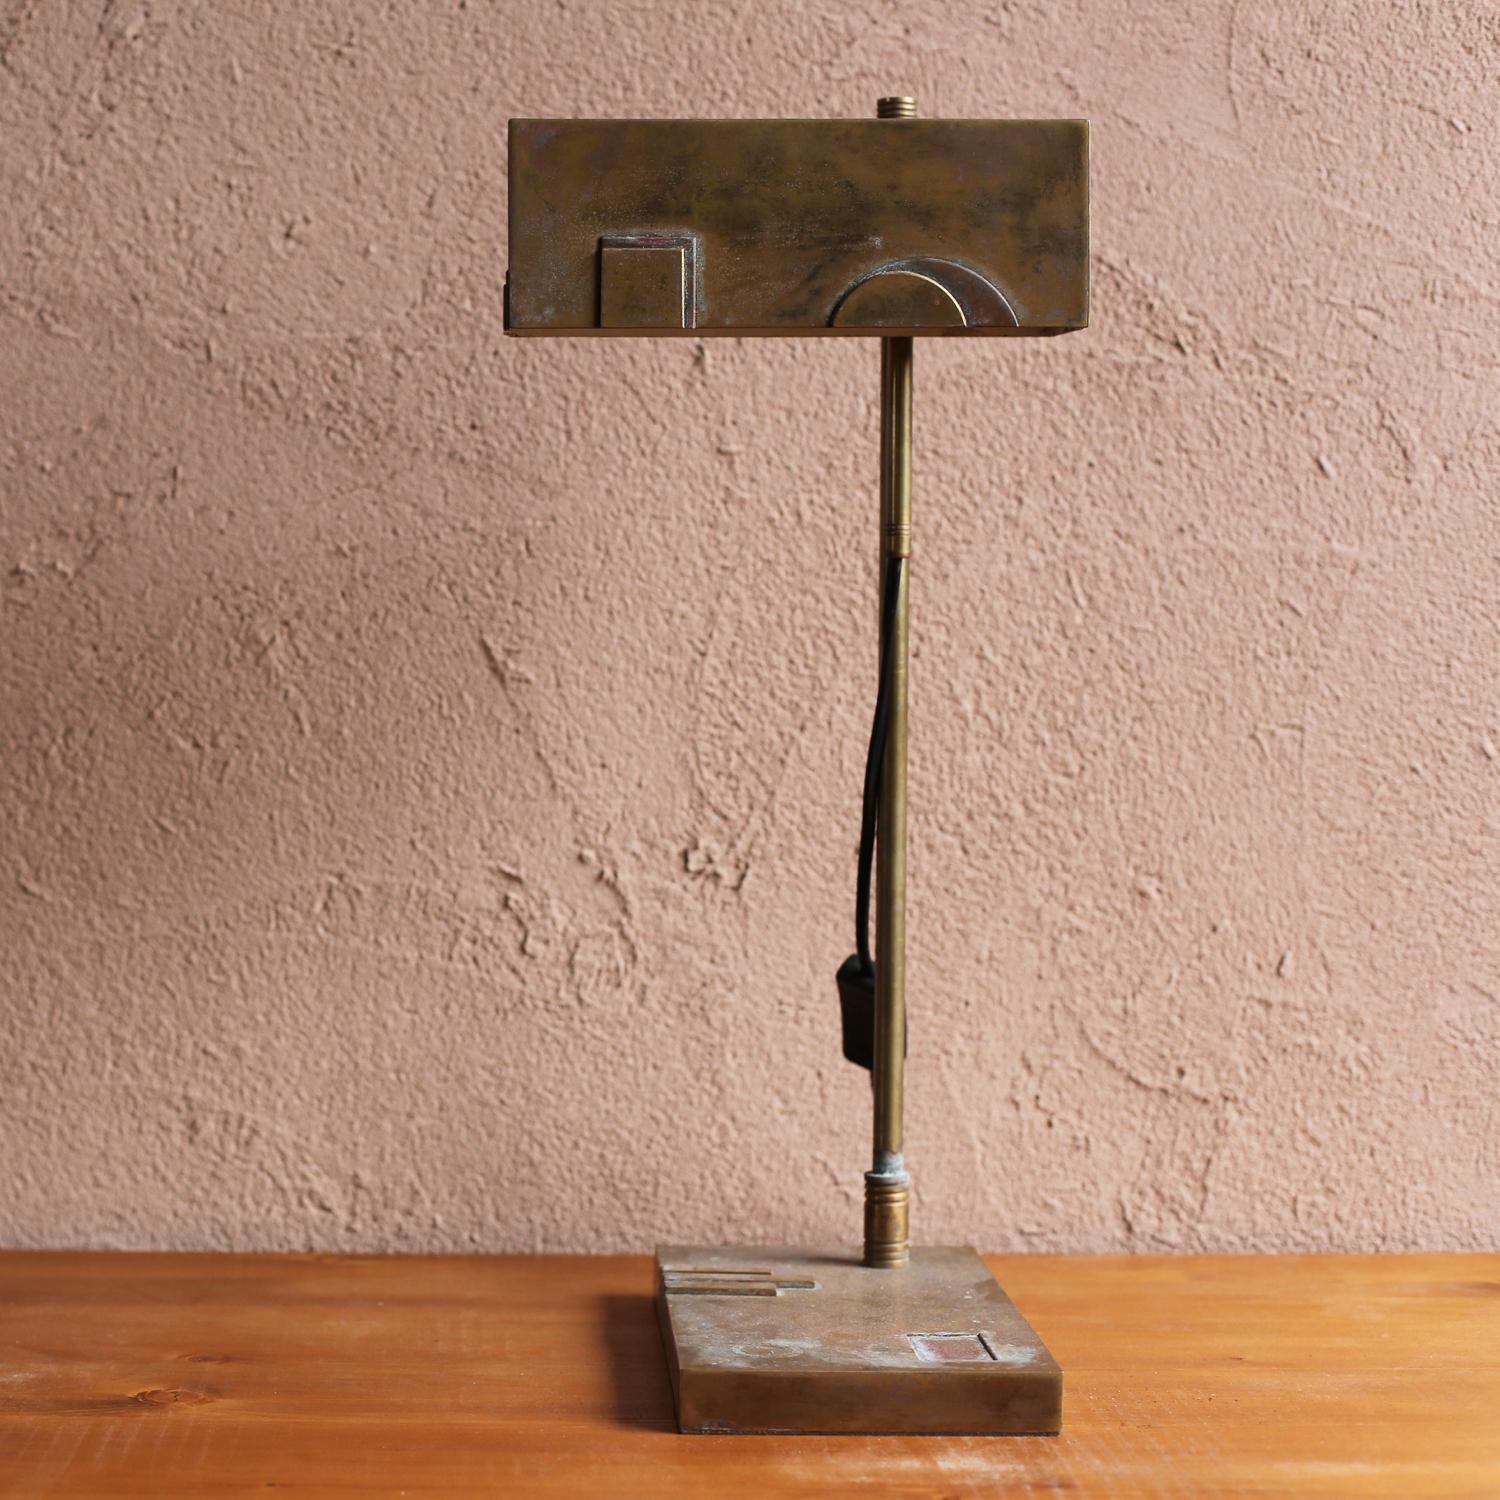 This is a desk lamp by Marcel Breuer, one of the Bauhaus masters.
It is a very rare model during the Art Deco period.
The height and angle of the shade can be adjusted 360 degrees.